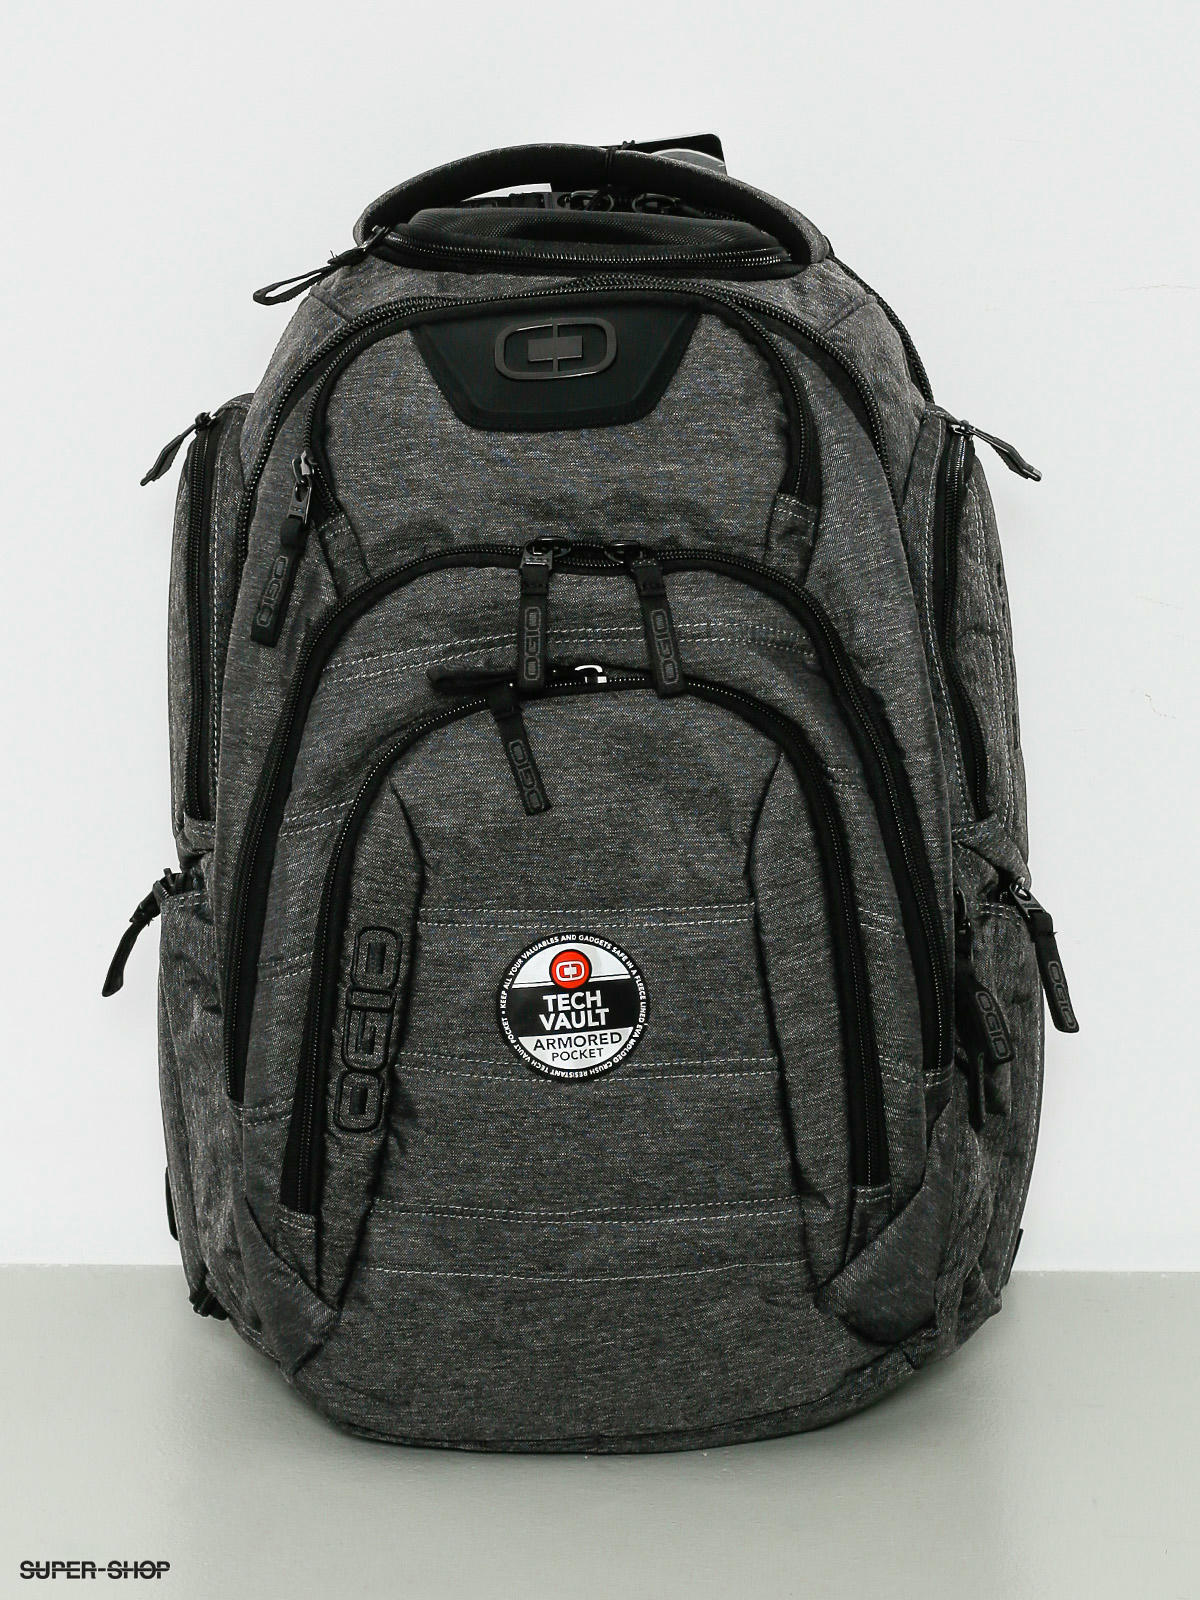 OGIO Renegade RSS - notebook carrying backpack - 111059.03 - Backpacks -  CDW.com